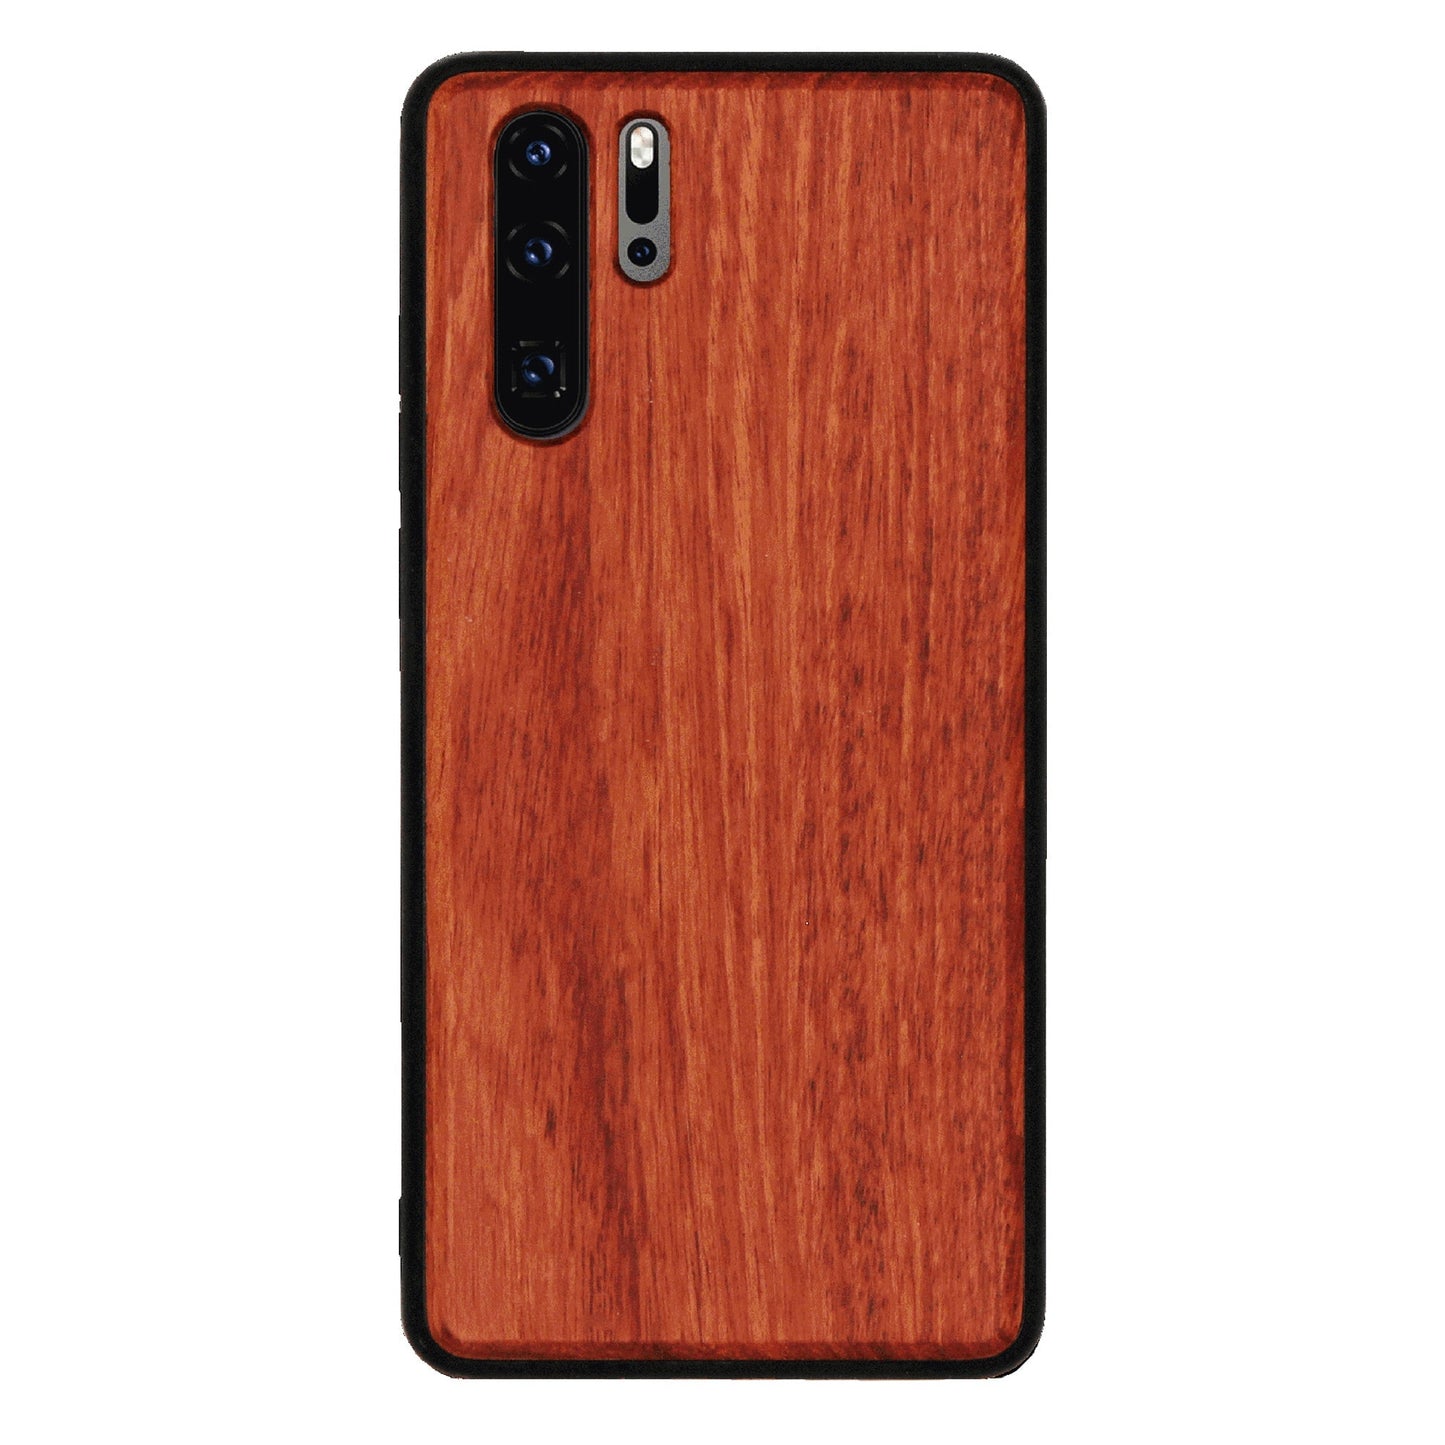 Rosewood Eden case for Huawei P30 Pro